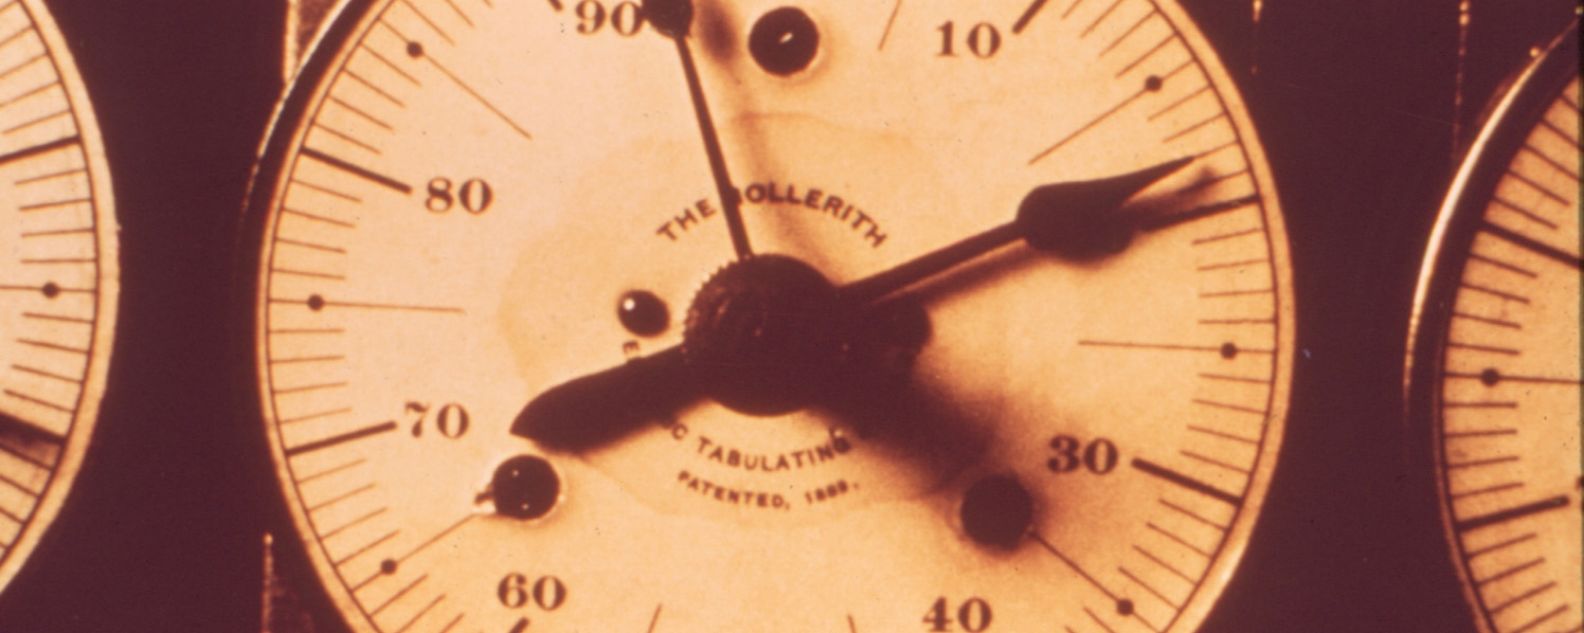 Close-up of a tabulating machine dial with a face showing zero to 99.